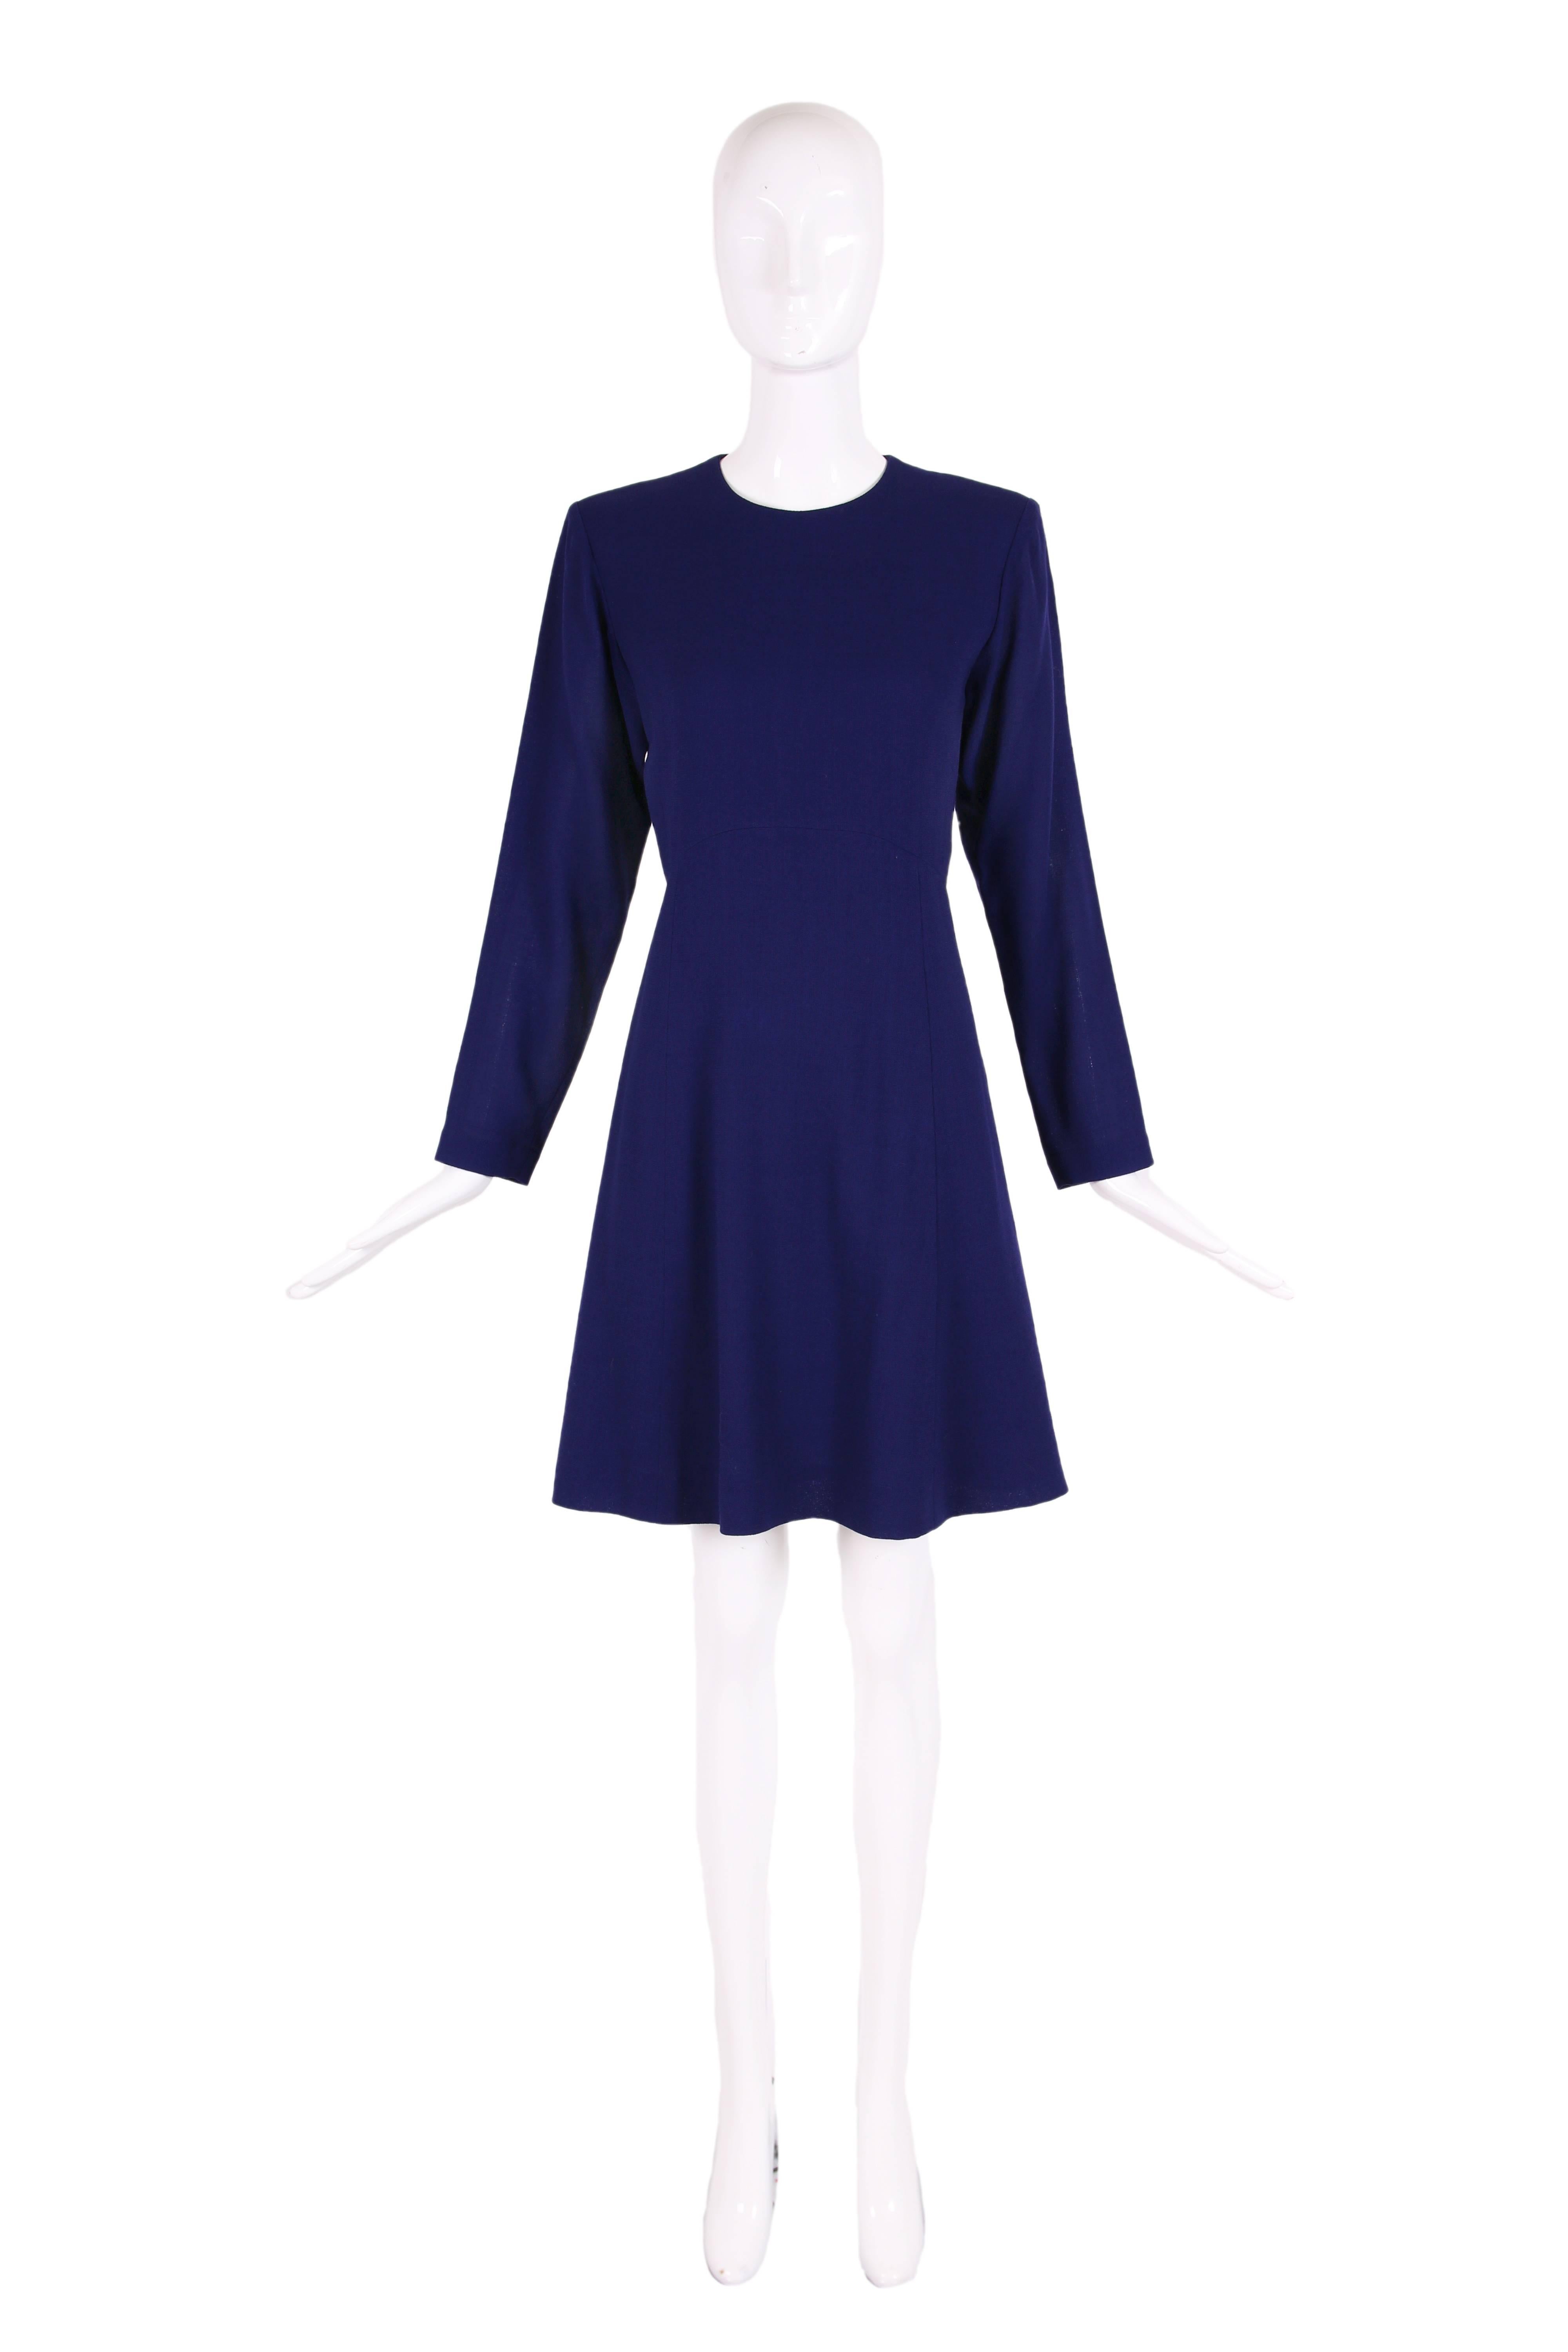 1990's Yves Saint Laurent deep purple day dress in a lightweight wool and slightly flared skirt. Hidden zipper up center back. Size tag 38. In excellent condition two tiny holes in the fabric just under the right sleeve - impossible to see unless